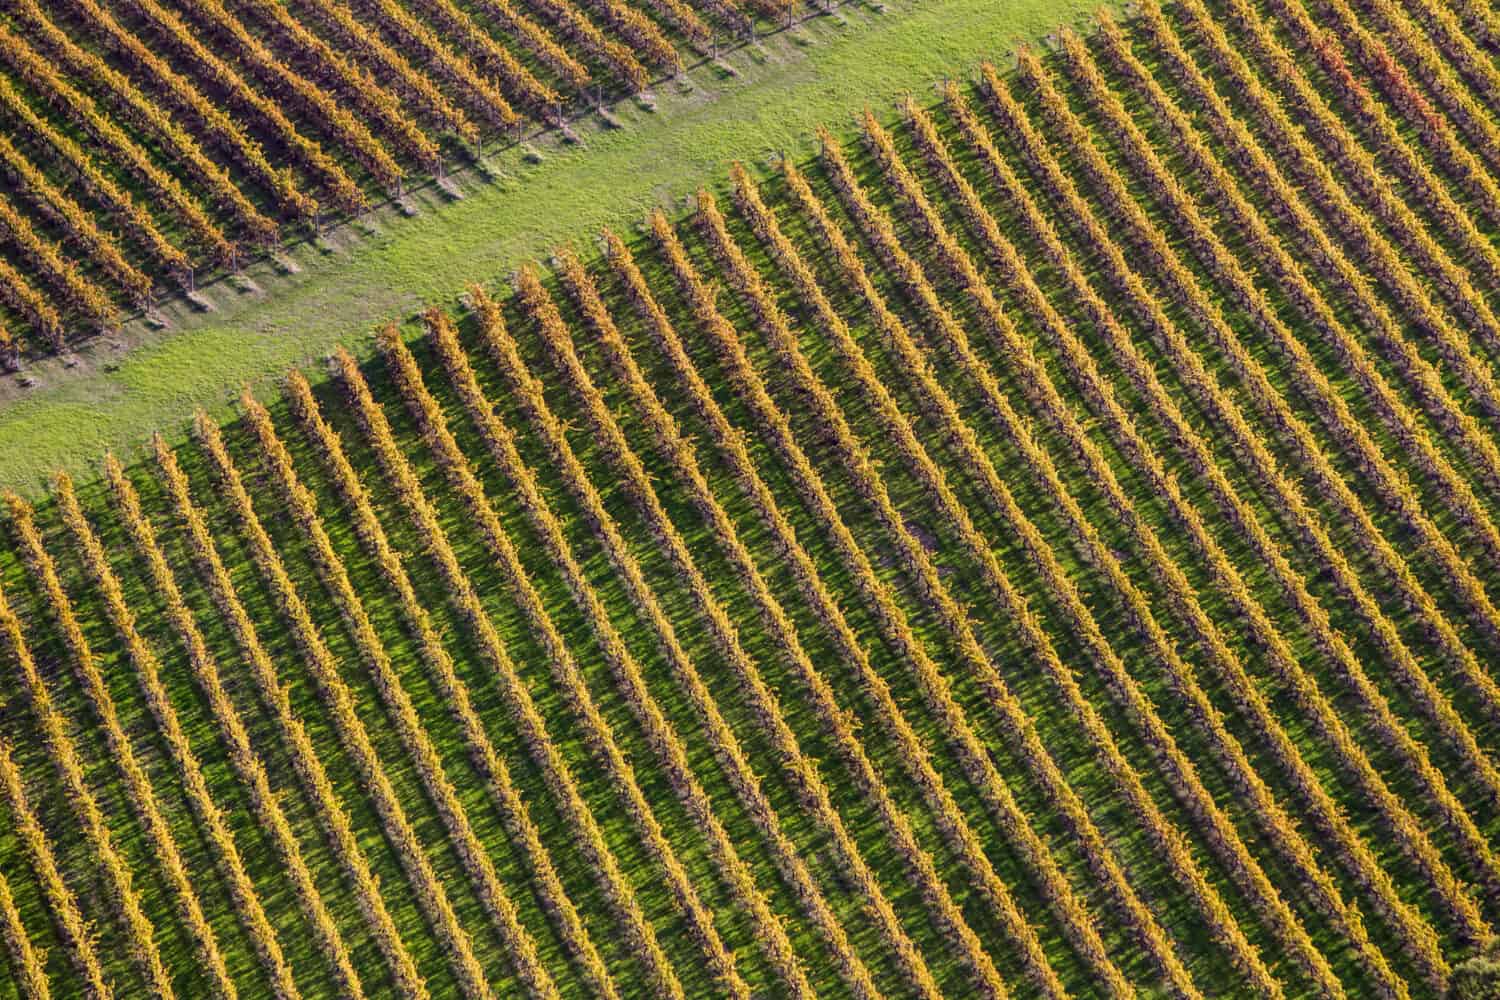 Aerial view of a Vineyard, Margaret River